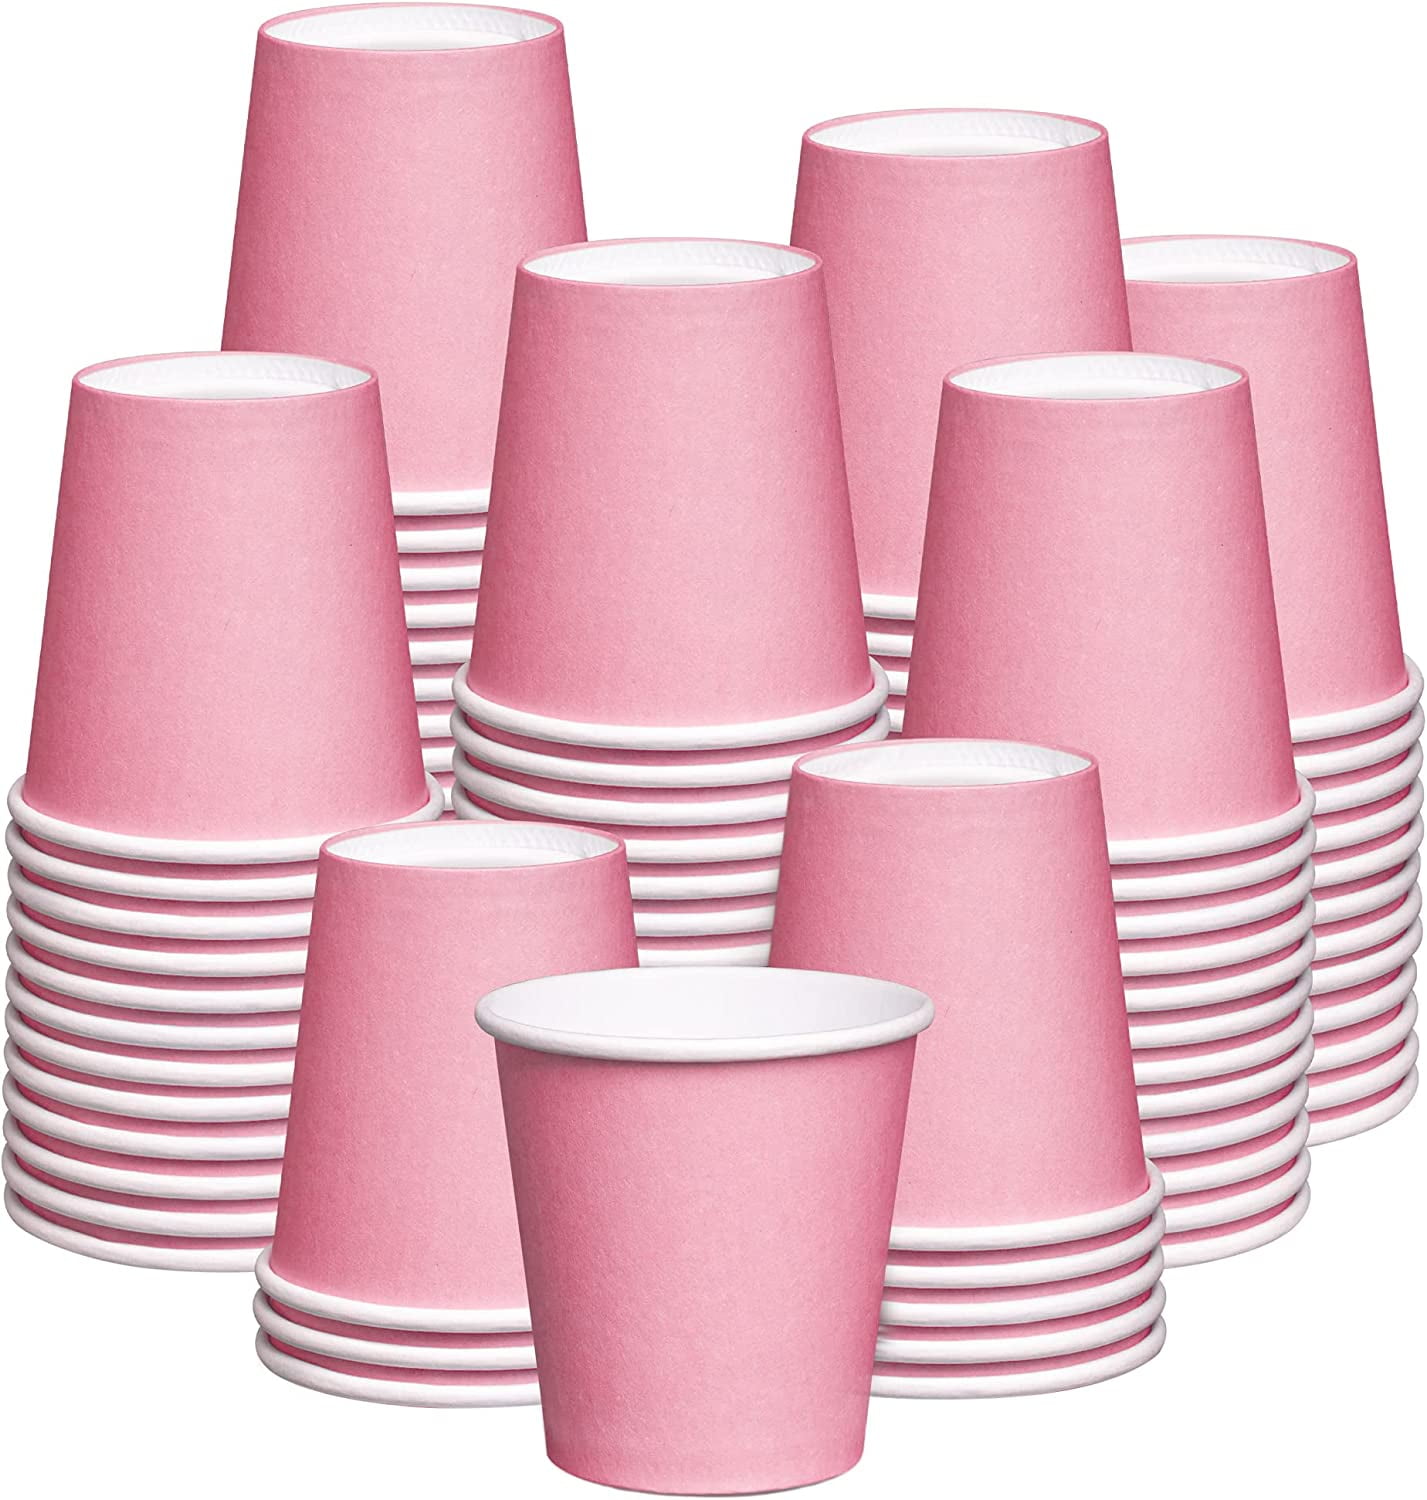 Comfy Package Small Paper Cups 3 Oz Pink Disposable Cups for